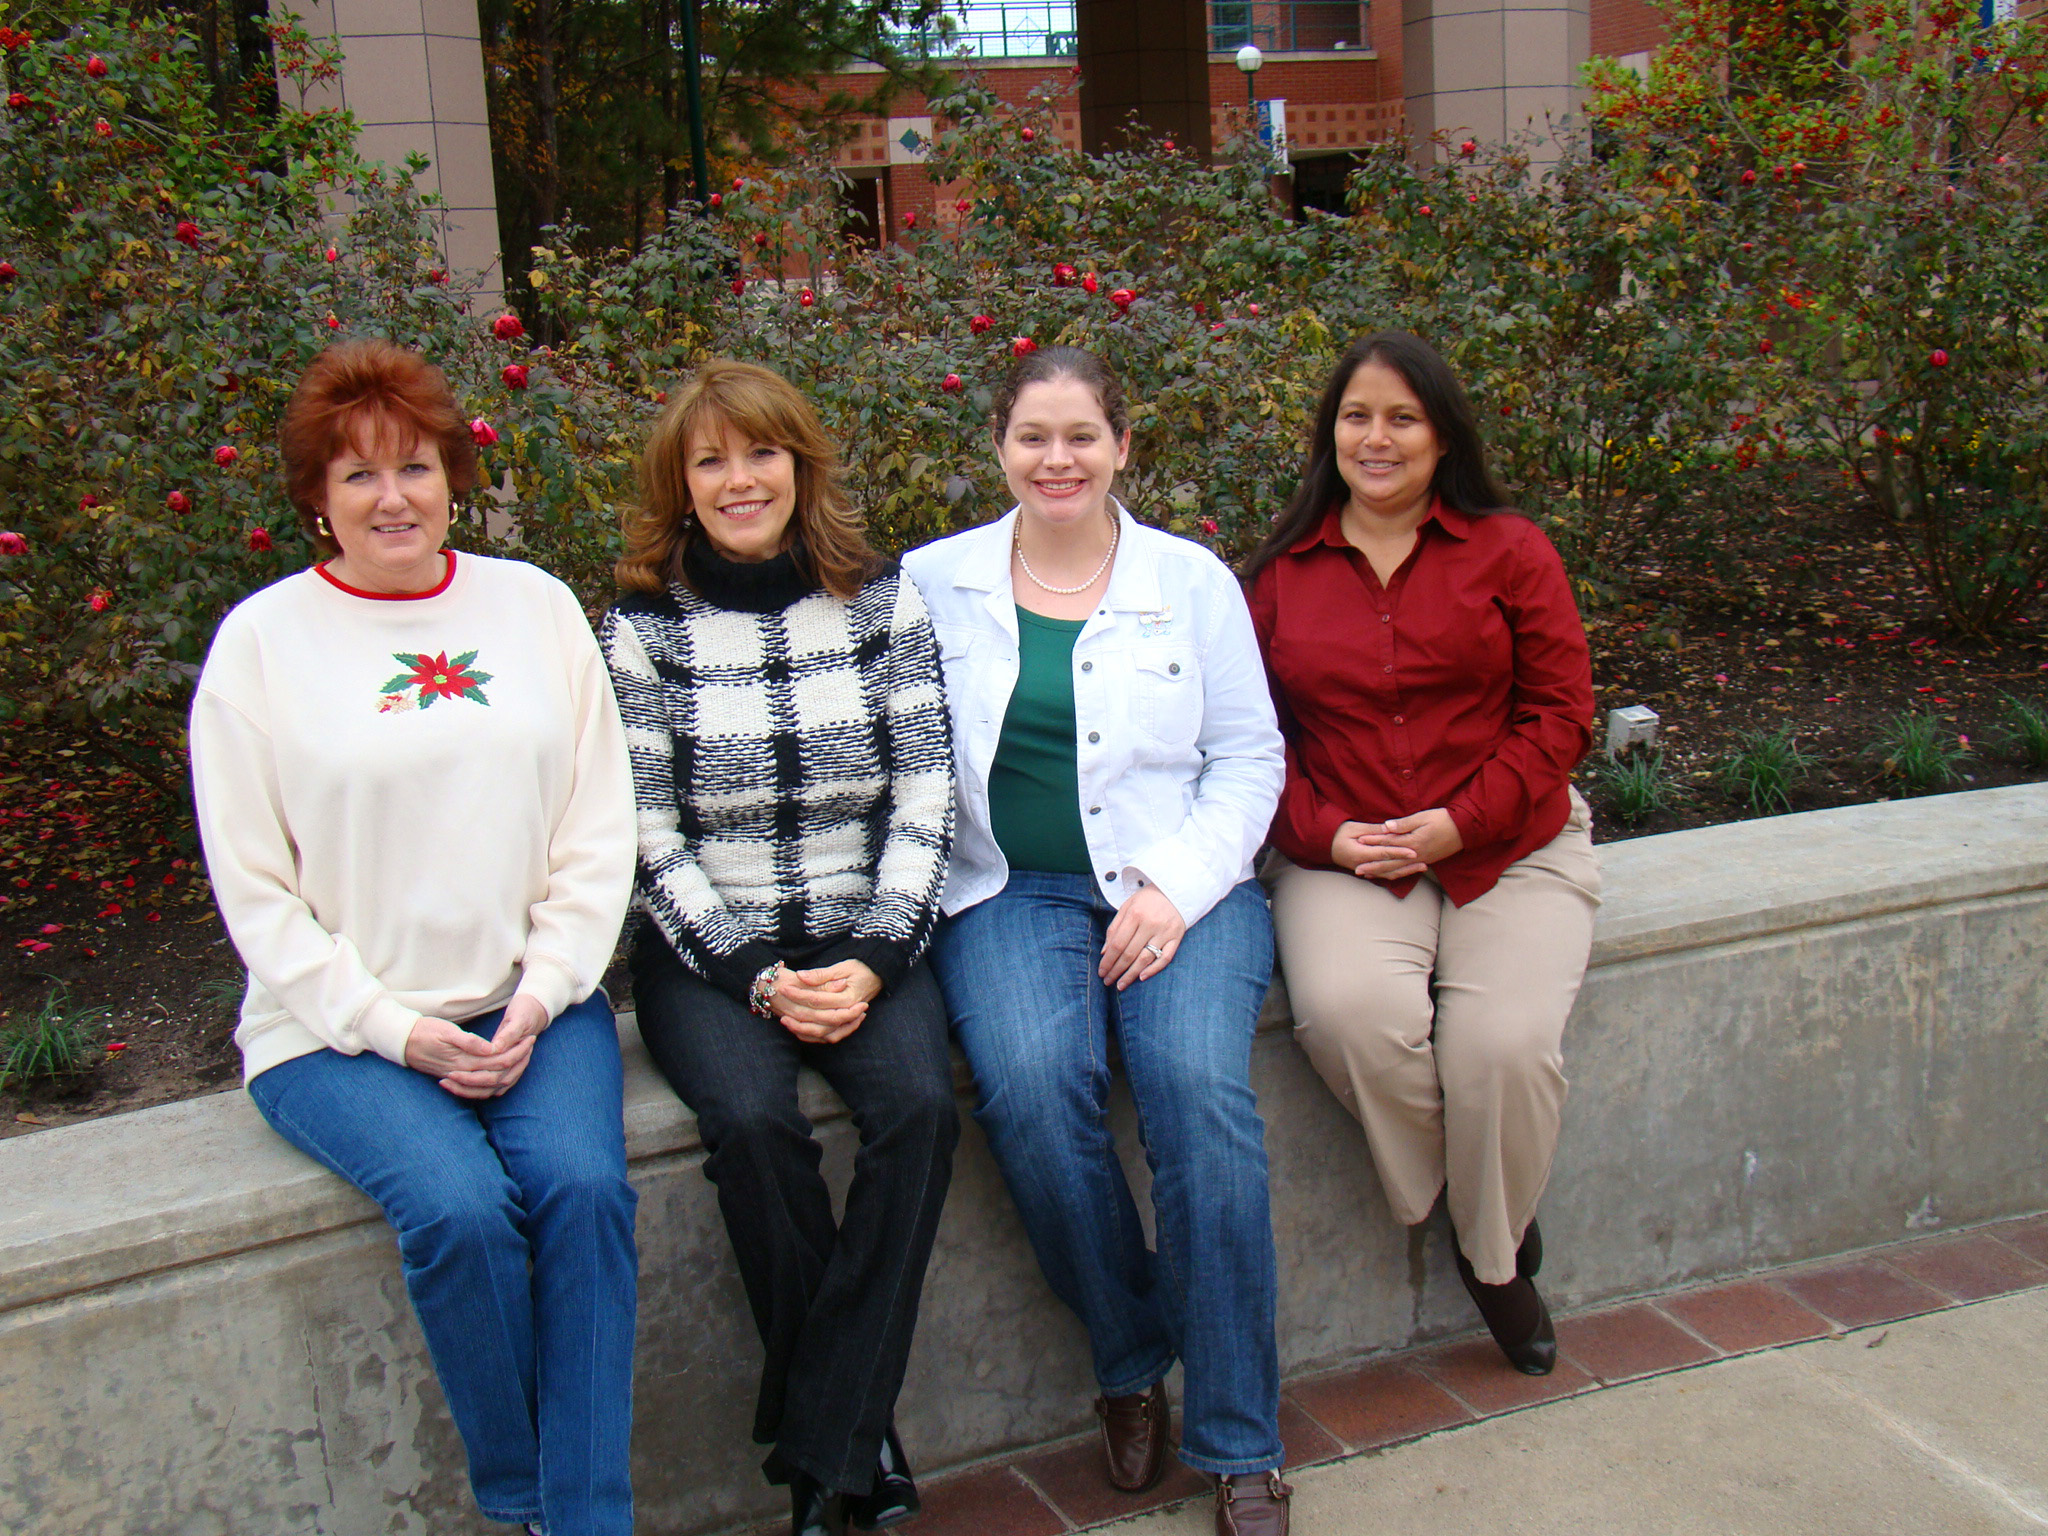 The recipients of Lone Star College-Montgomerys 2009 Staff Excellence Awards are (l. to r.): Jane Thorn, custodian supervisor; Joan McLouth, division coordinator; Liz Centanni, division coordinator; and Manuela Sandoval, nursing lab coordinator.